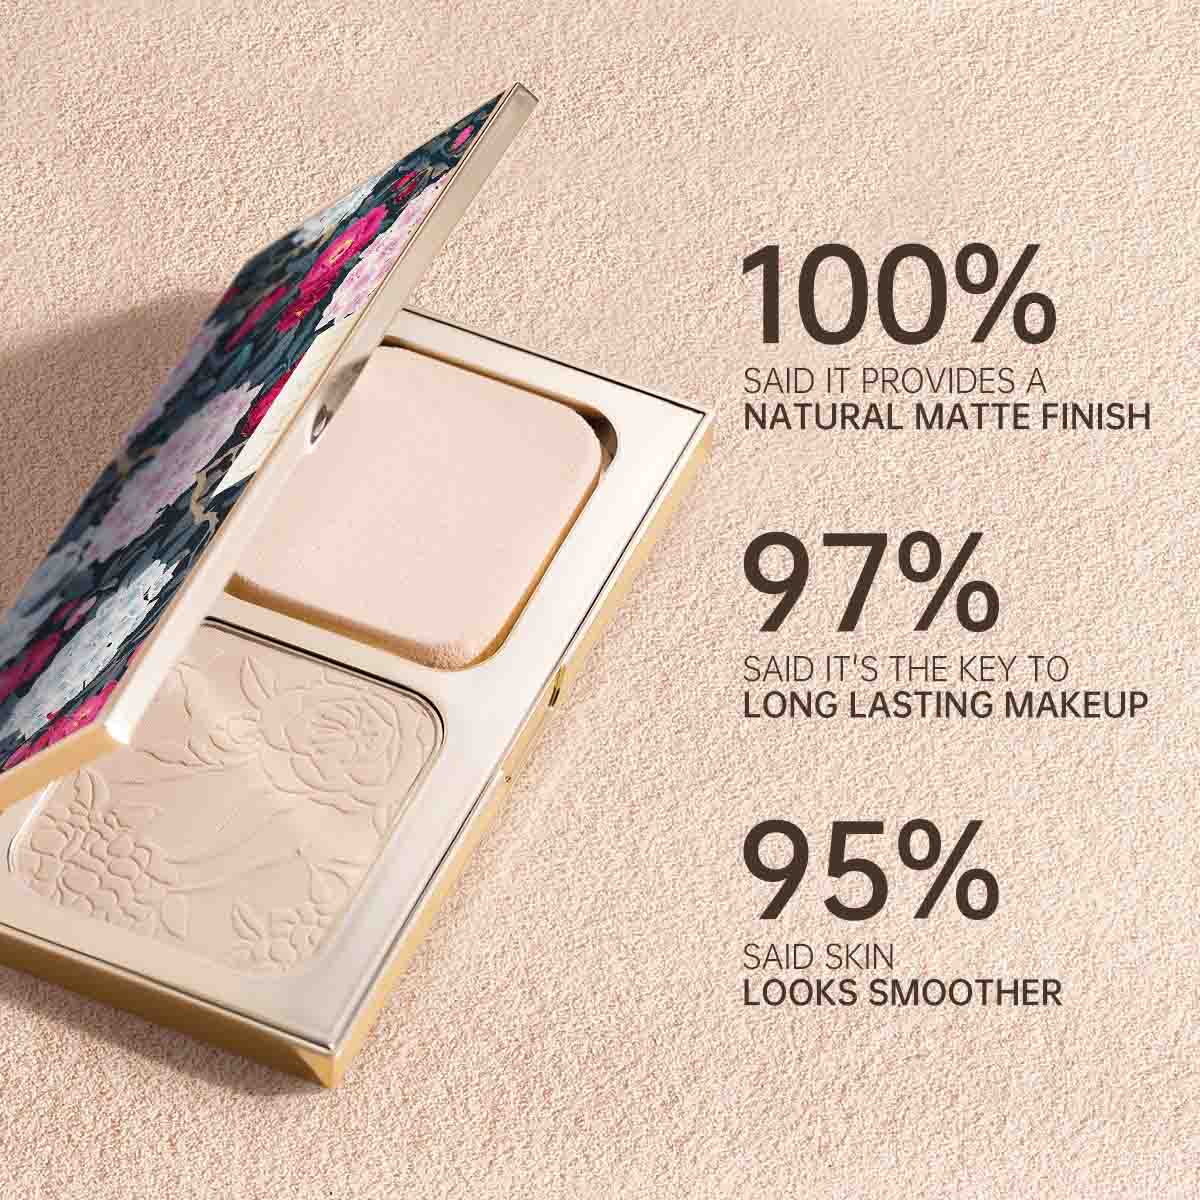 CATKIN Matte Face Pressed Setting Powder Lightweight, Ultra-fine Powder Long Lasting Oil Control Minimizing Pores and Fine Lines Silky-smooth Setting Powder